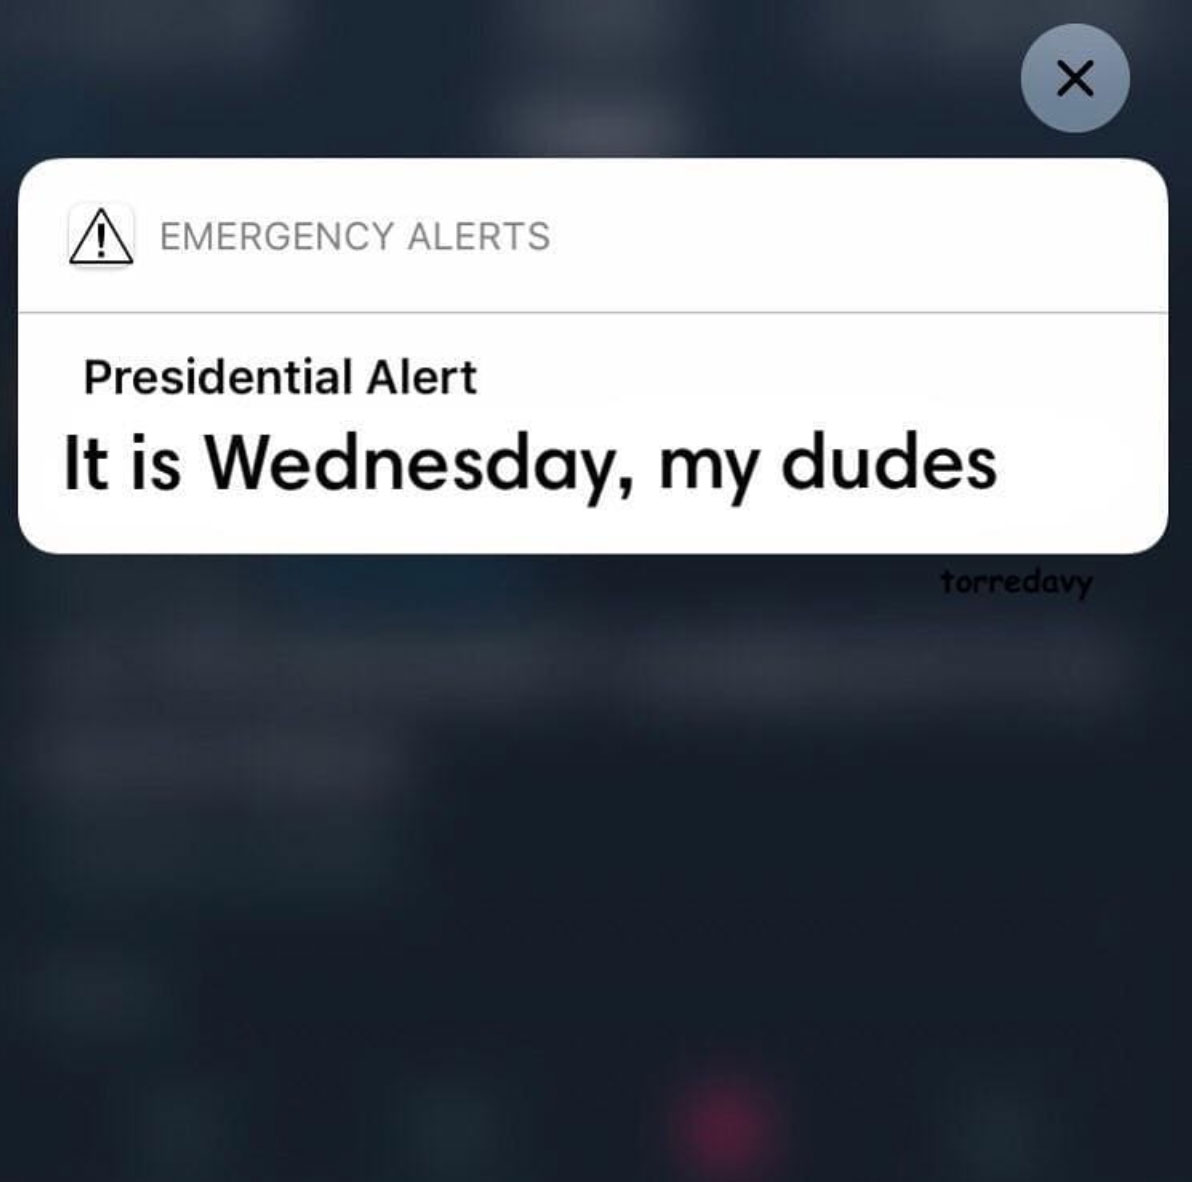 Presidential Alert that says 'It is Wednesday, my dudes'